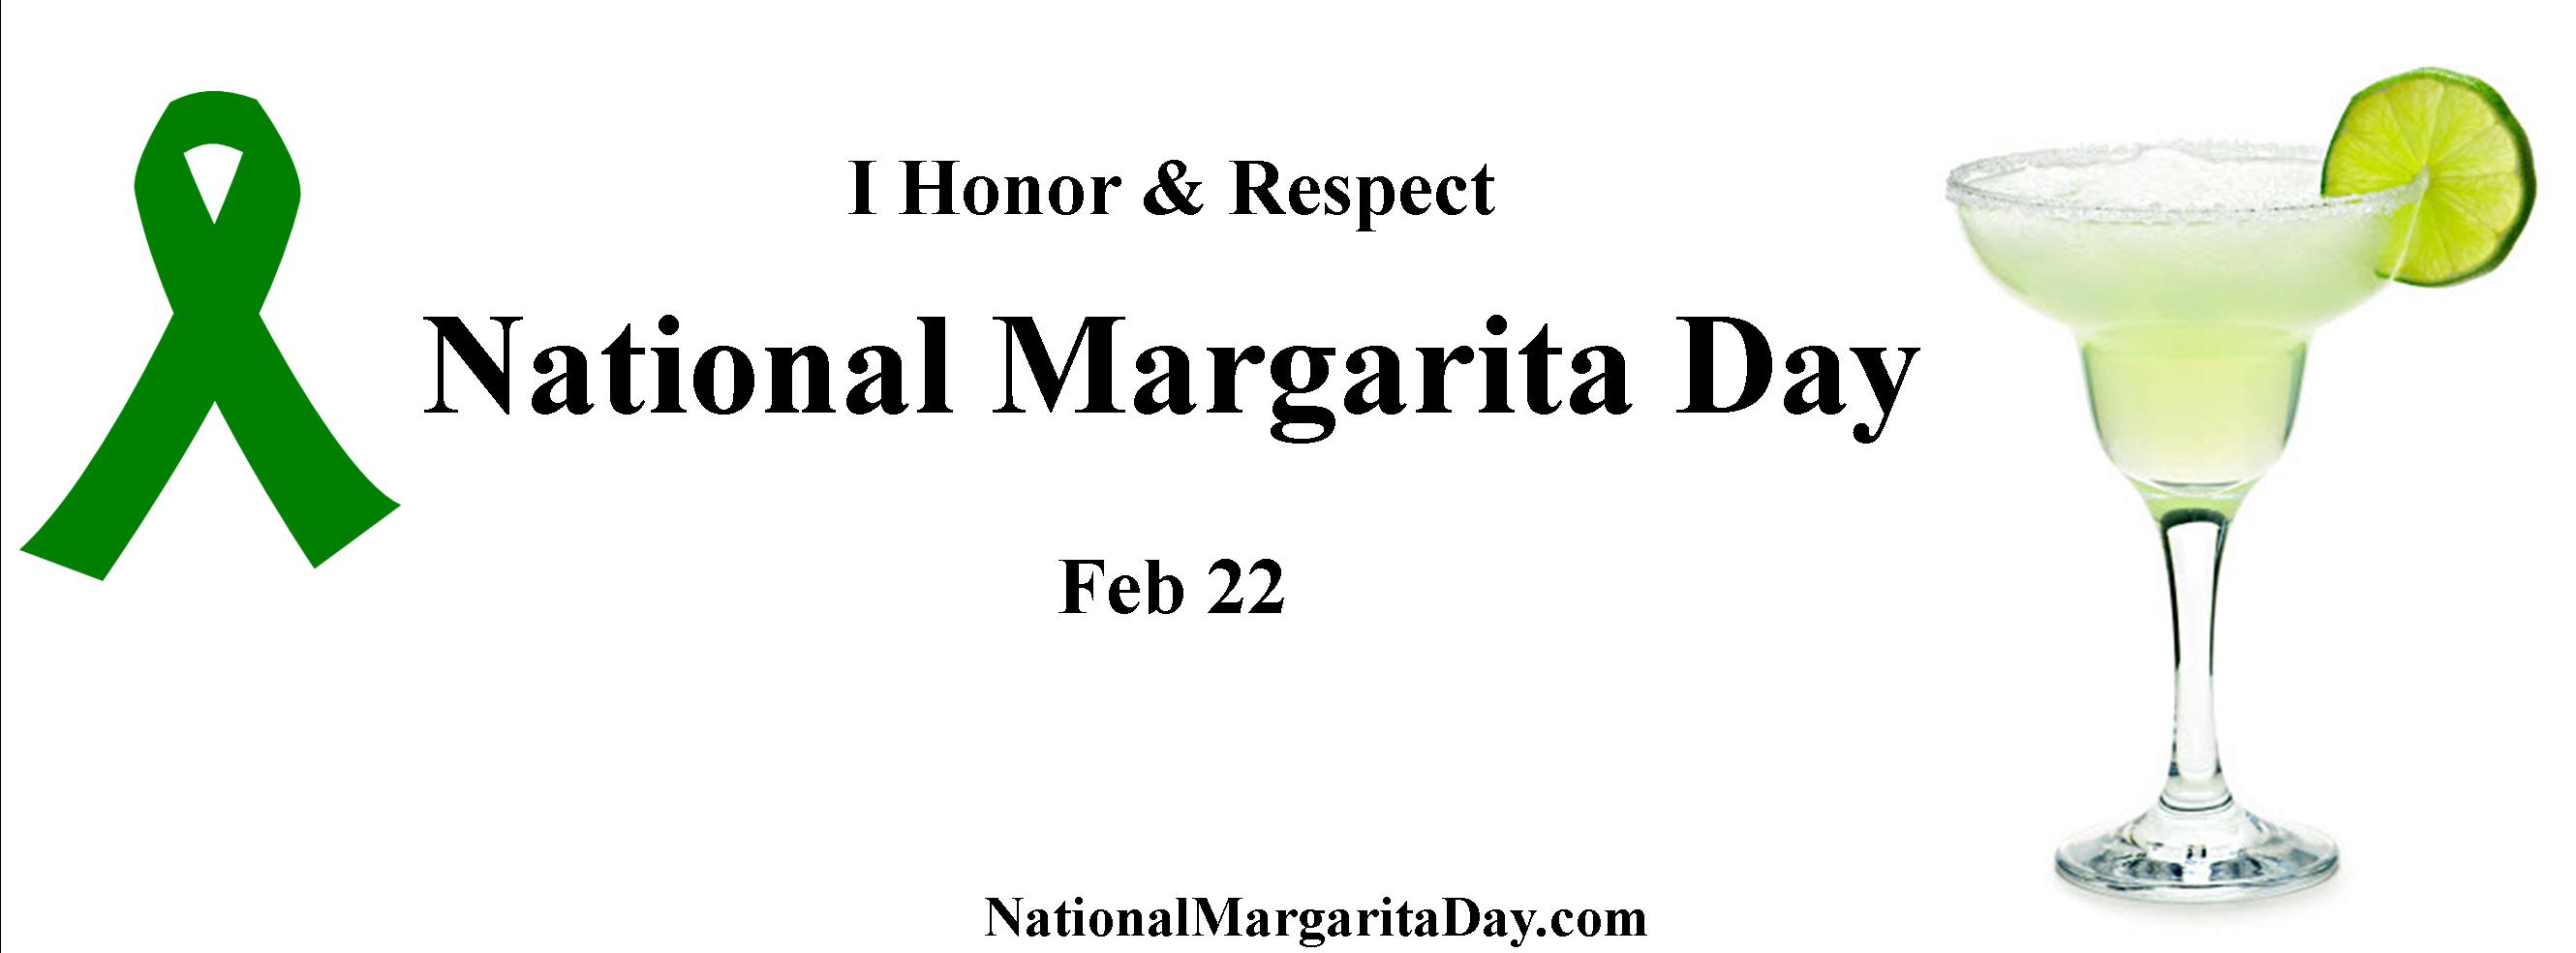 Support National Margarita Day by Going Green